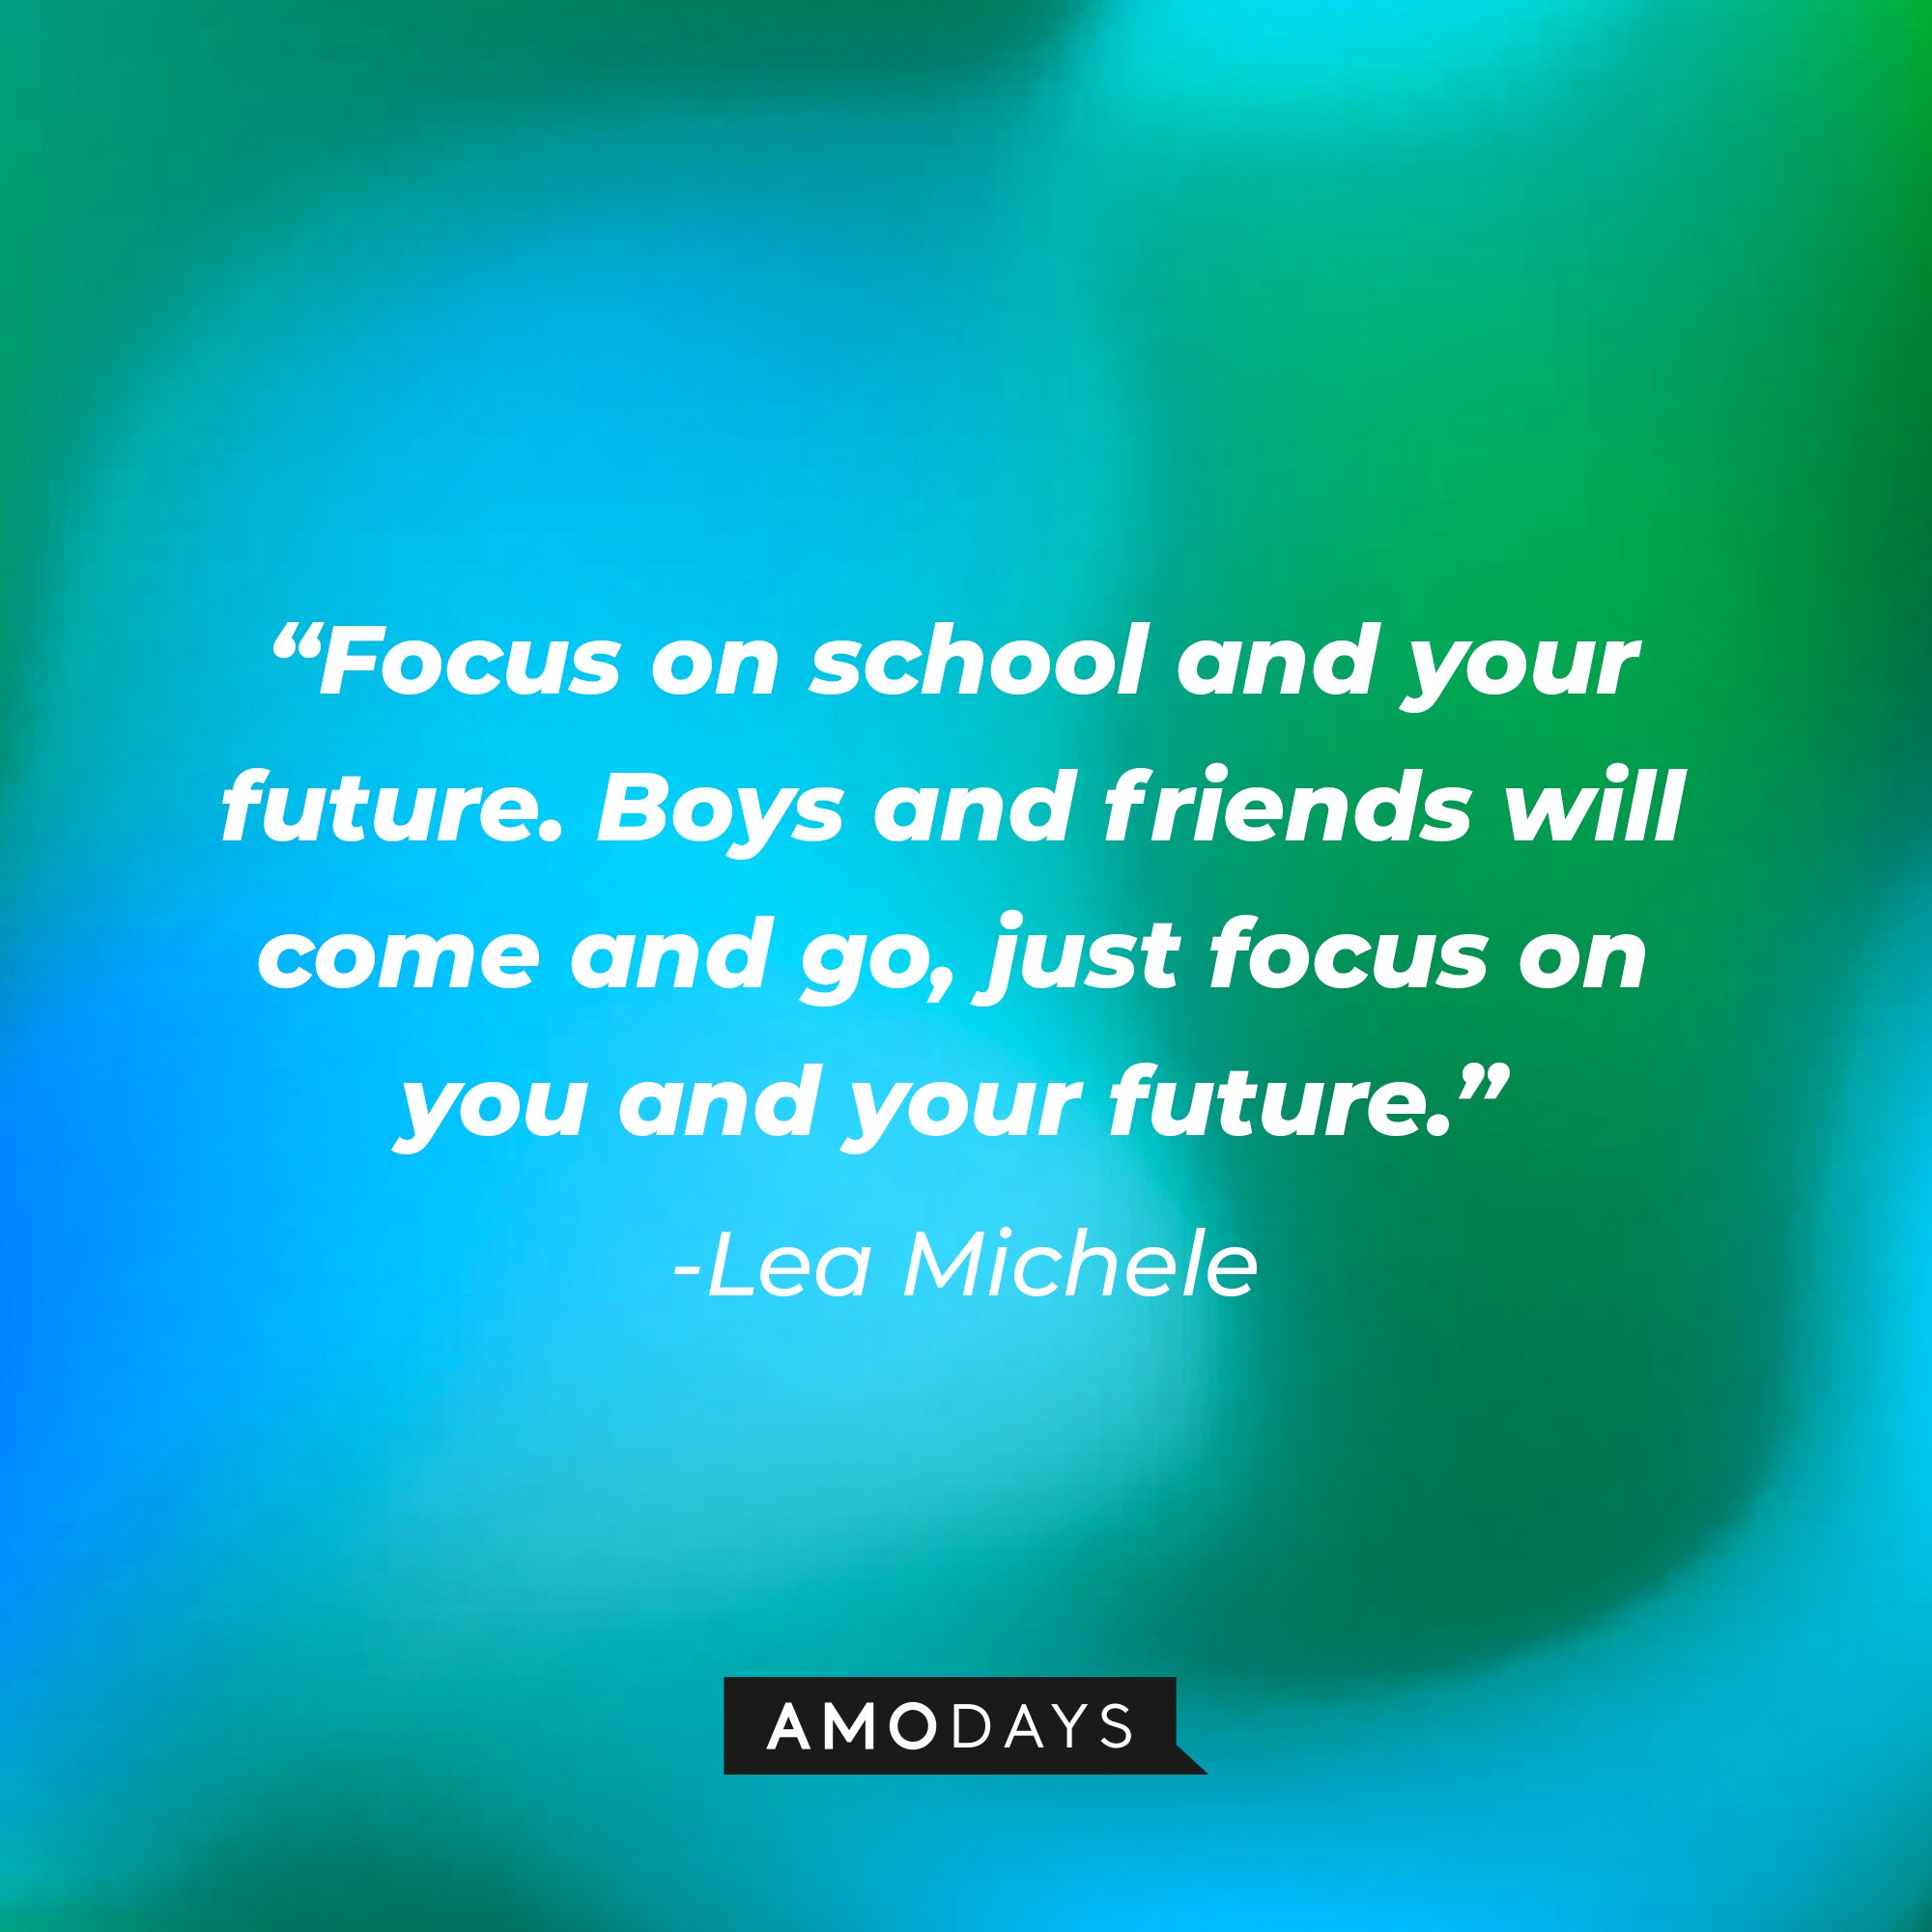  Lea Michele’s quote: "Focus on school and your future. Boys and friends will come and go; just focus on you and your future." | Image: AmoDays